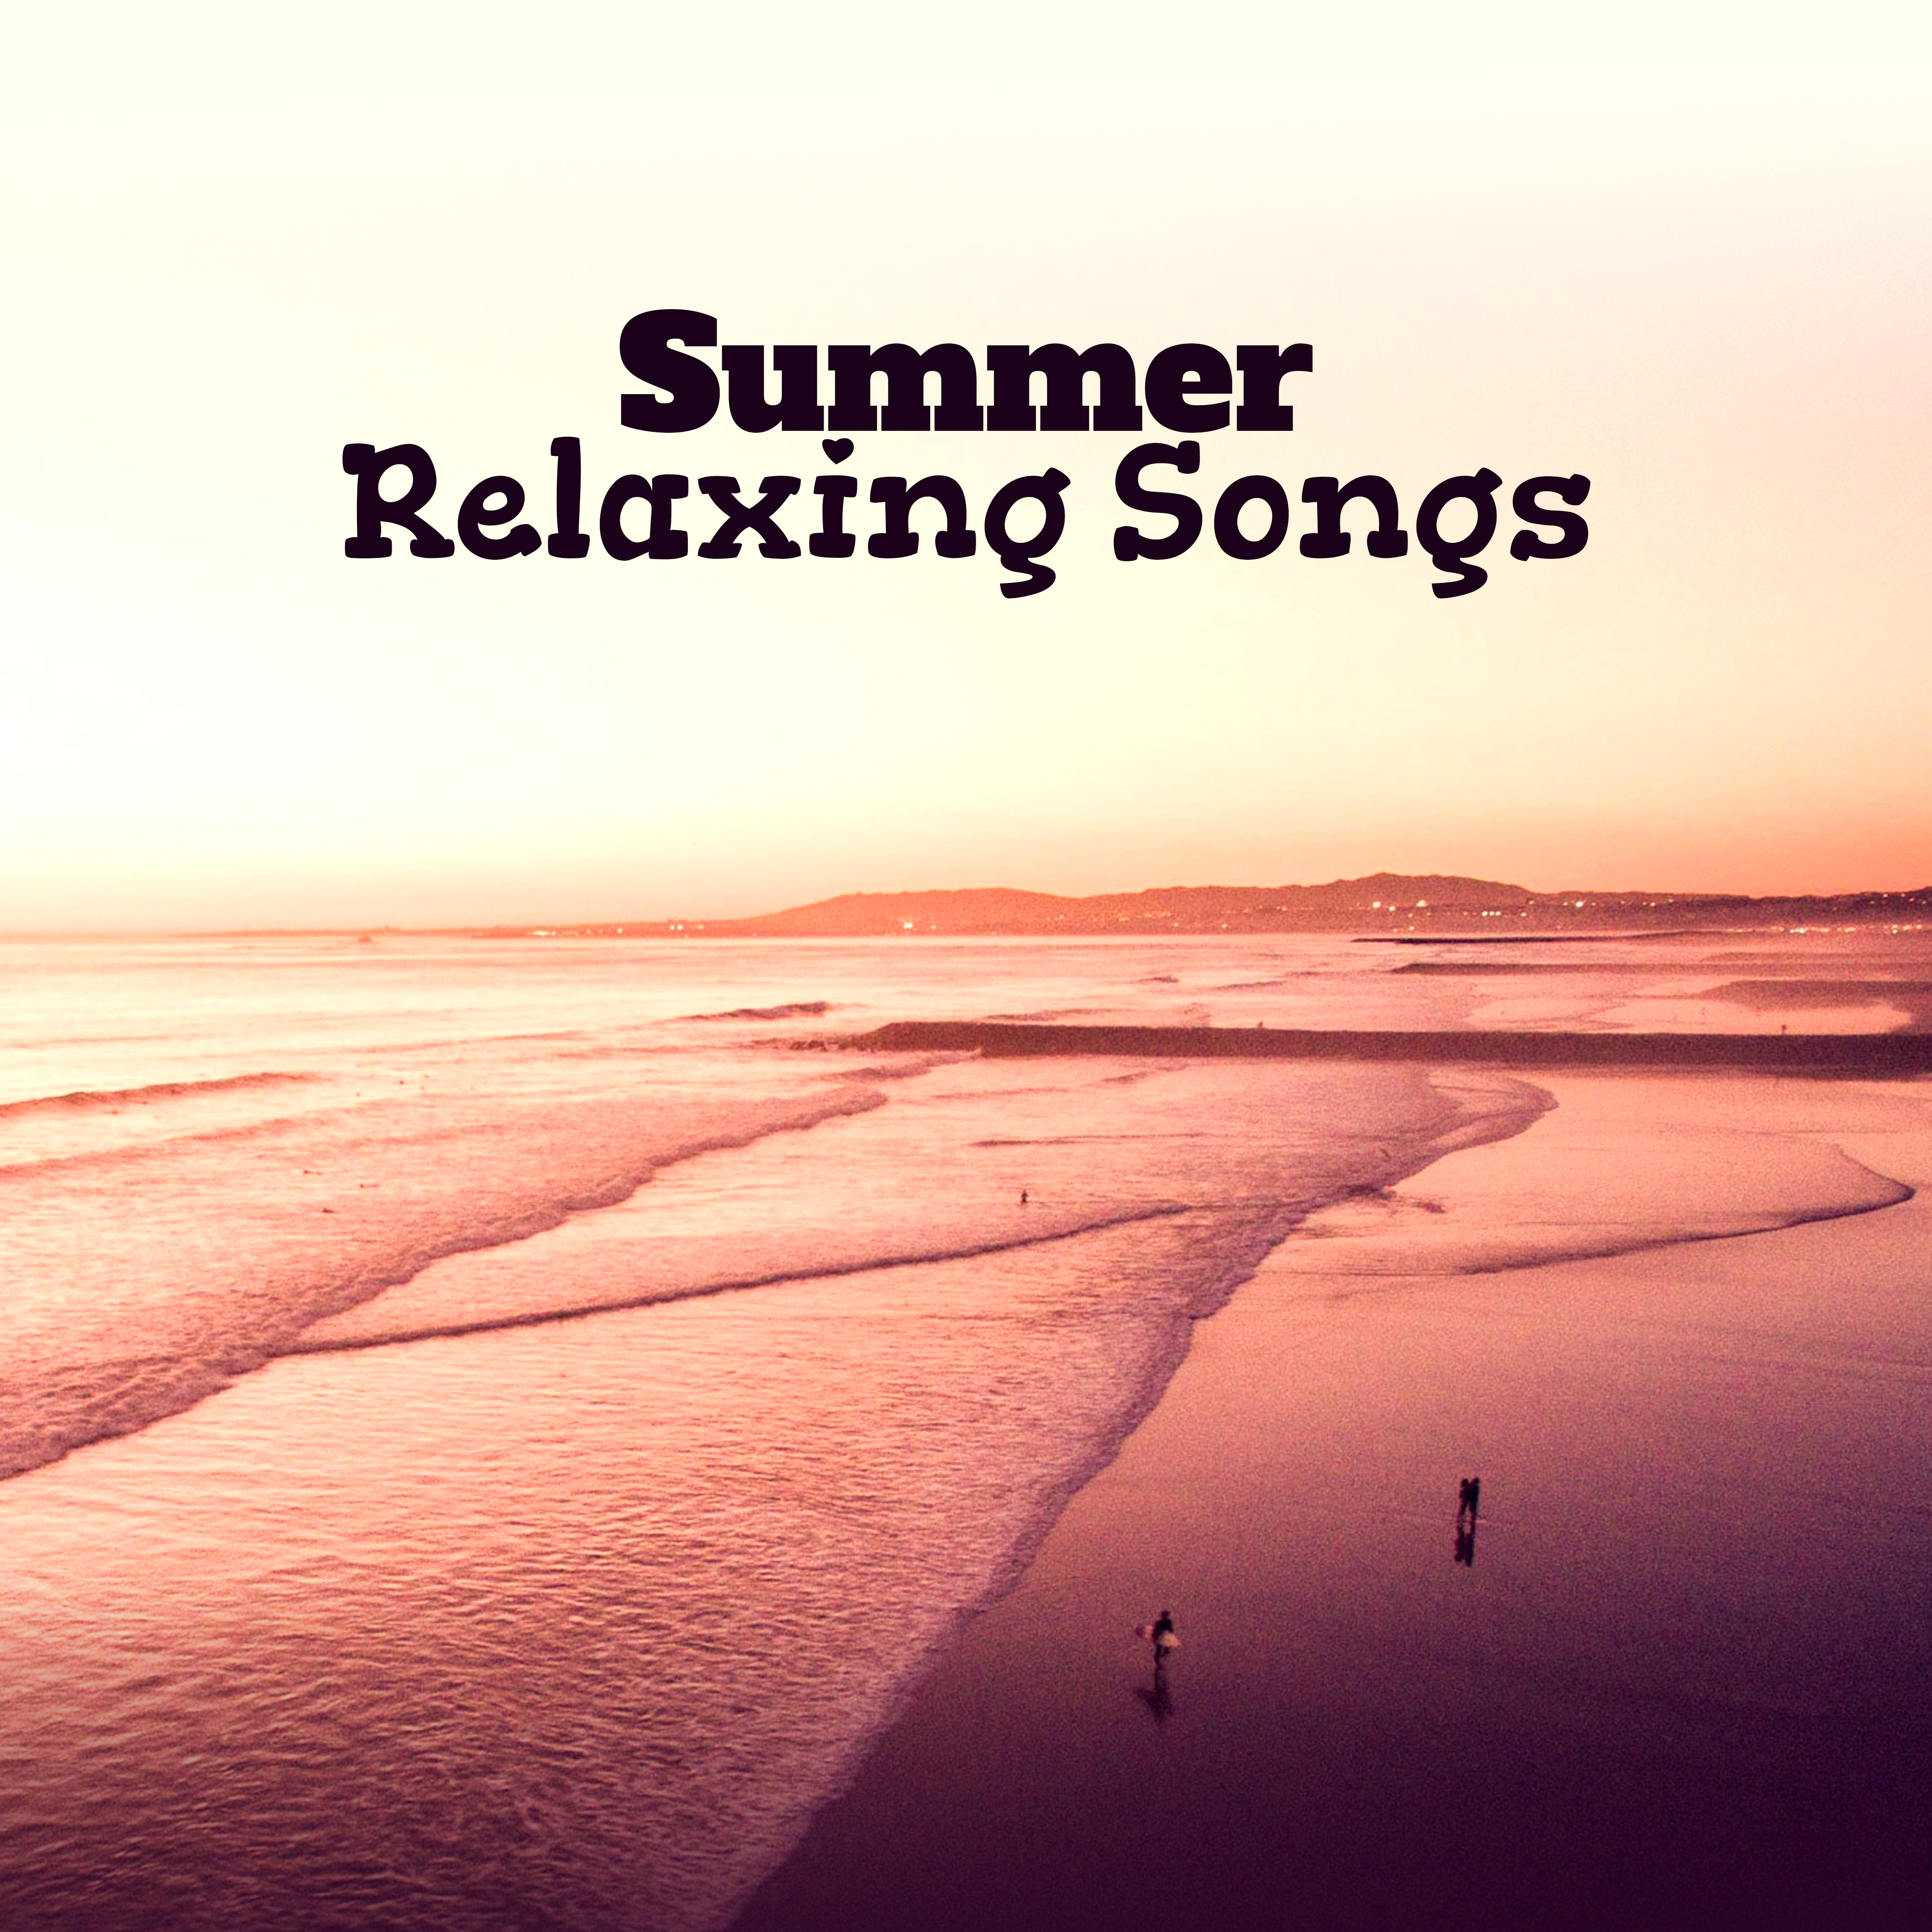 Summer Relaxing Songs  Time to Rest, Chill Out Beats, Vibes to Relax, Ibiza Shore, Beach Lounge